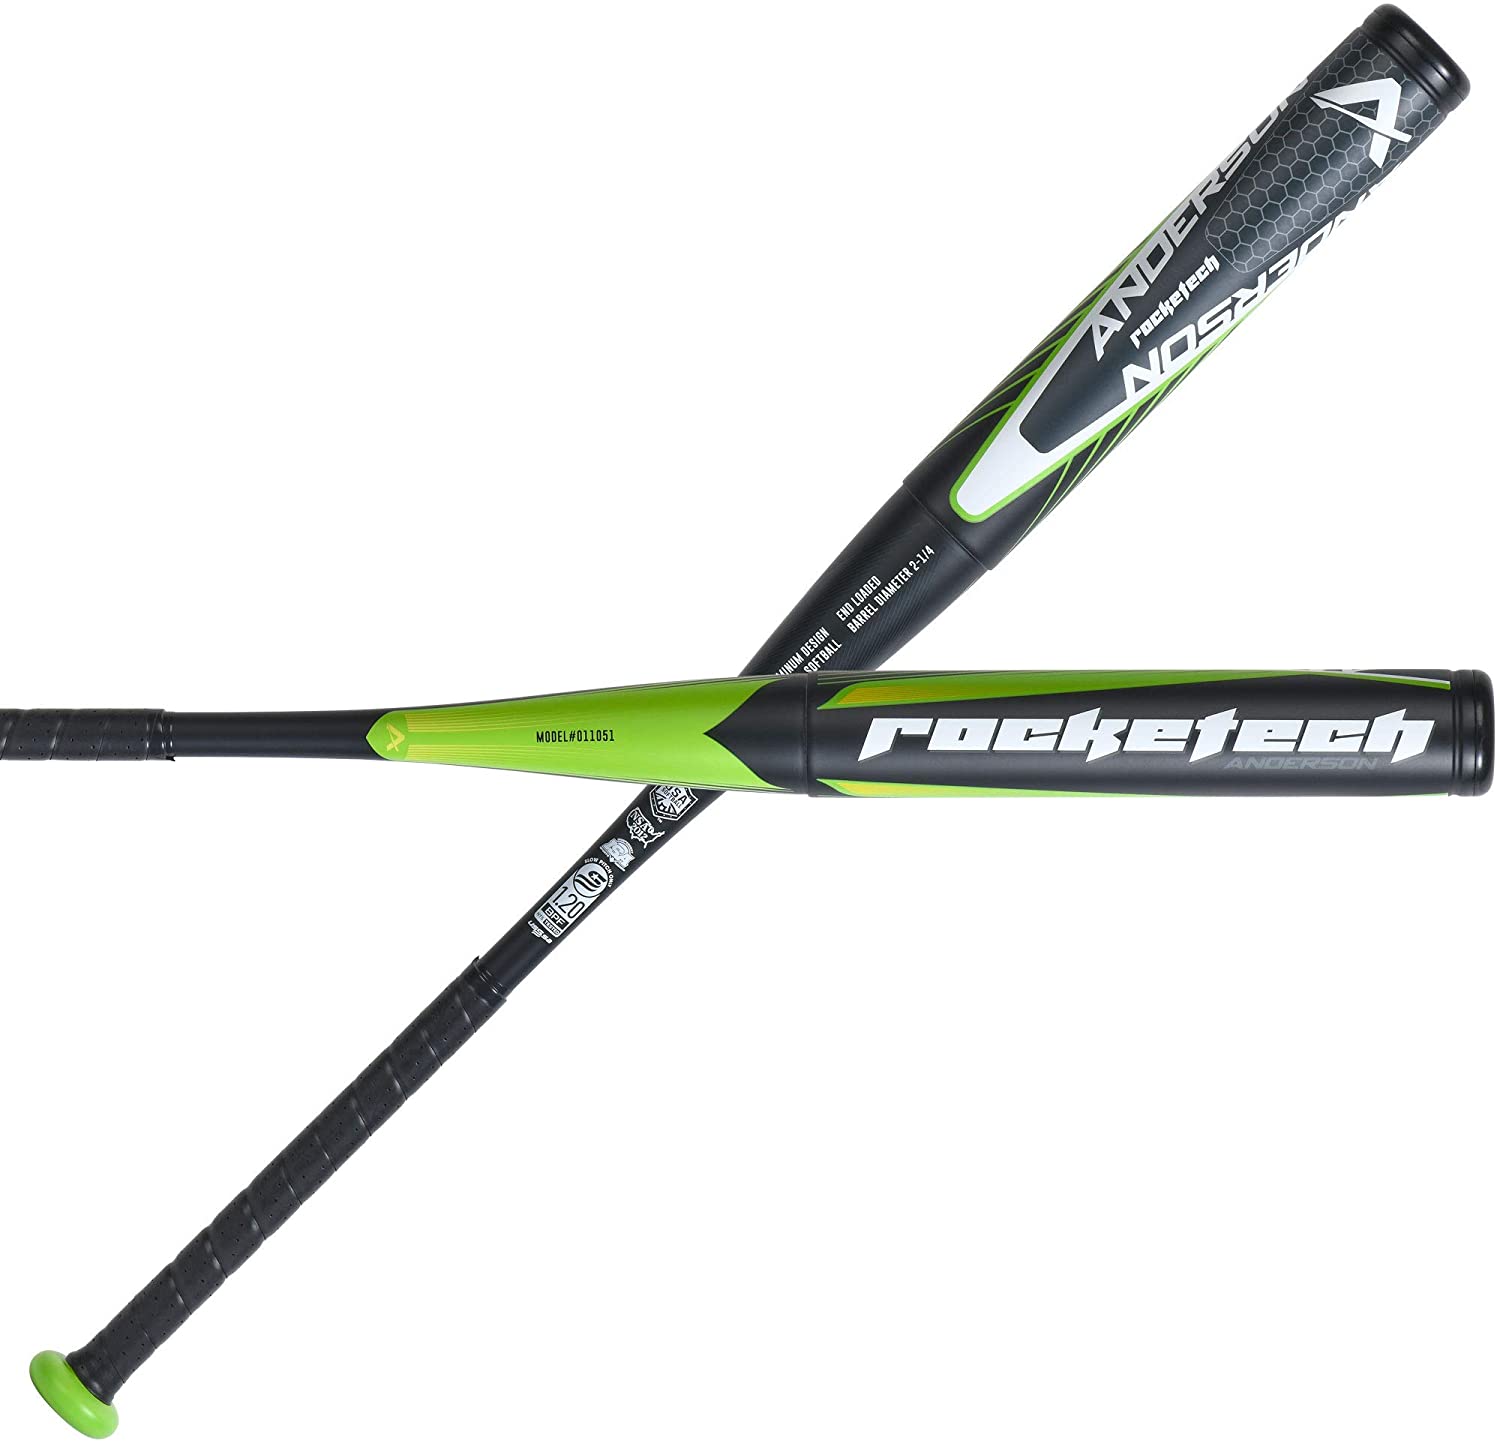 anderson-rocketech-2021-slowpitch-softball-bat-34-inch-28-oz 0110513-3428 Anderson  For over 15 years the Anderson Rocketech has been dominating the